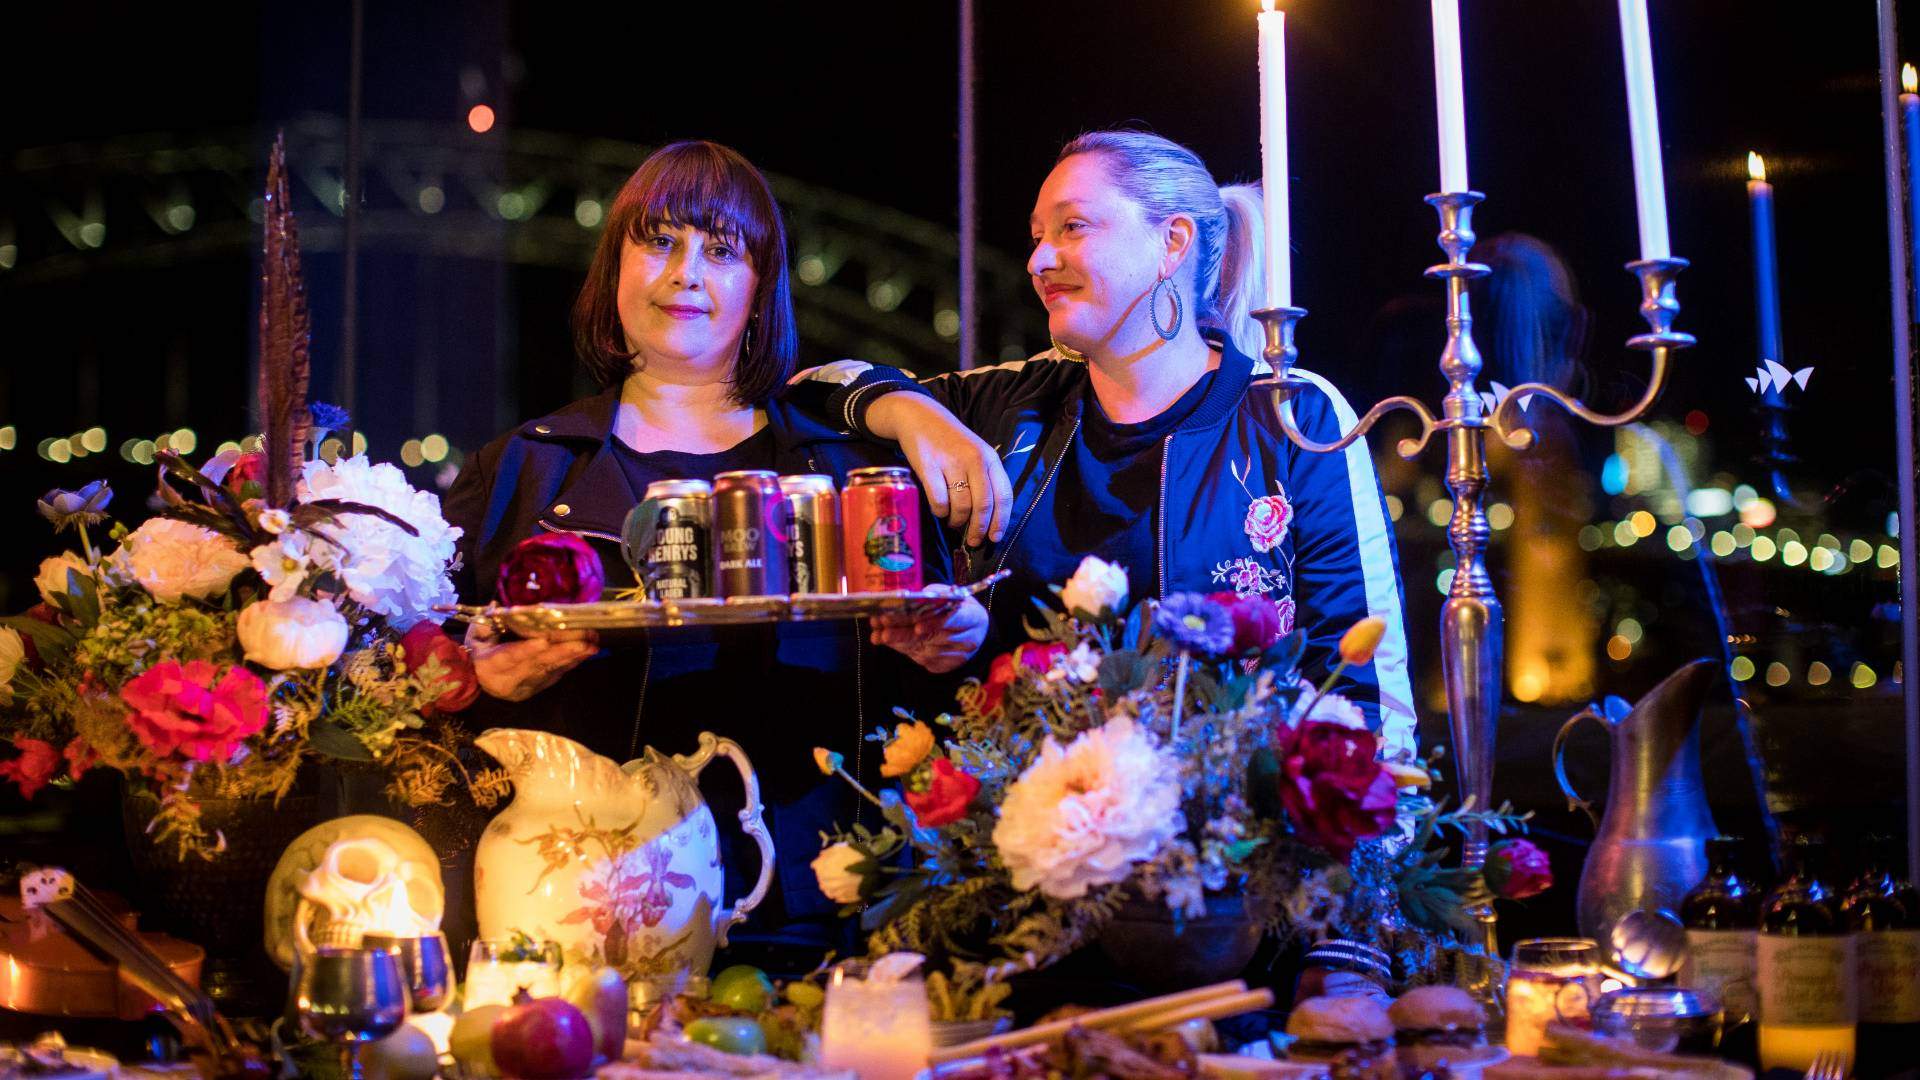 The Sydney Opera House's Vivid Pop-Up Bar Is an Opulent Post-Punk Homage to The Cure